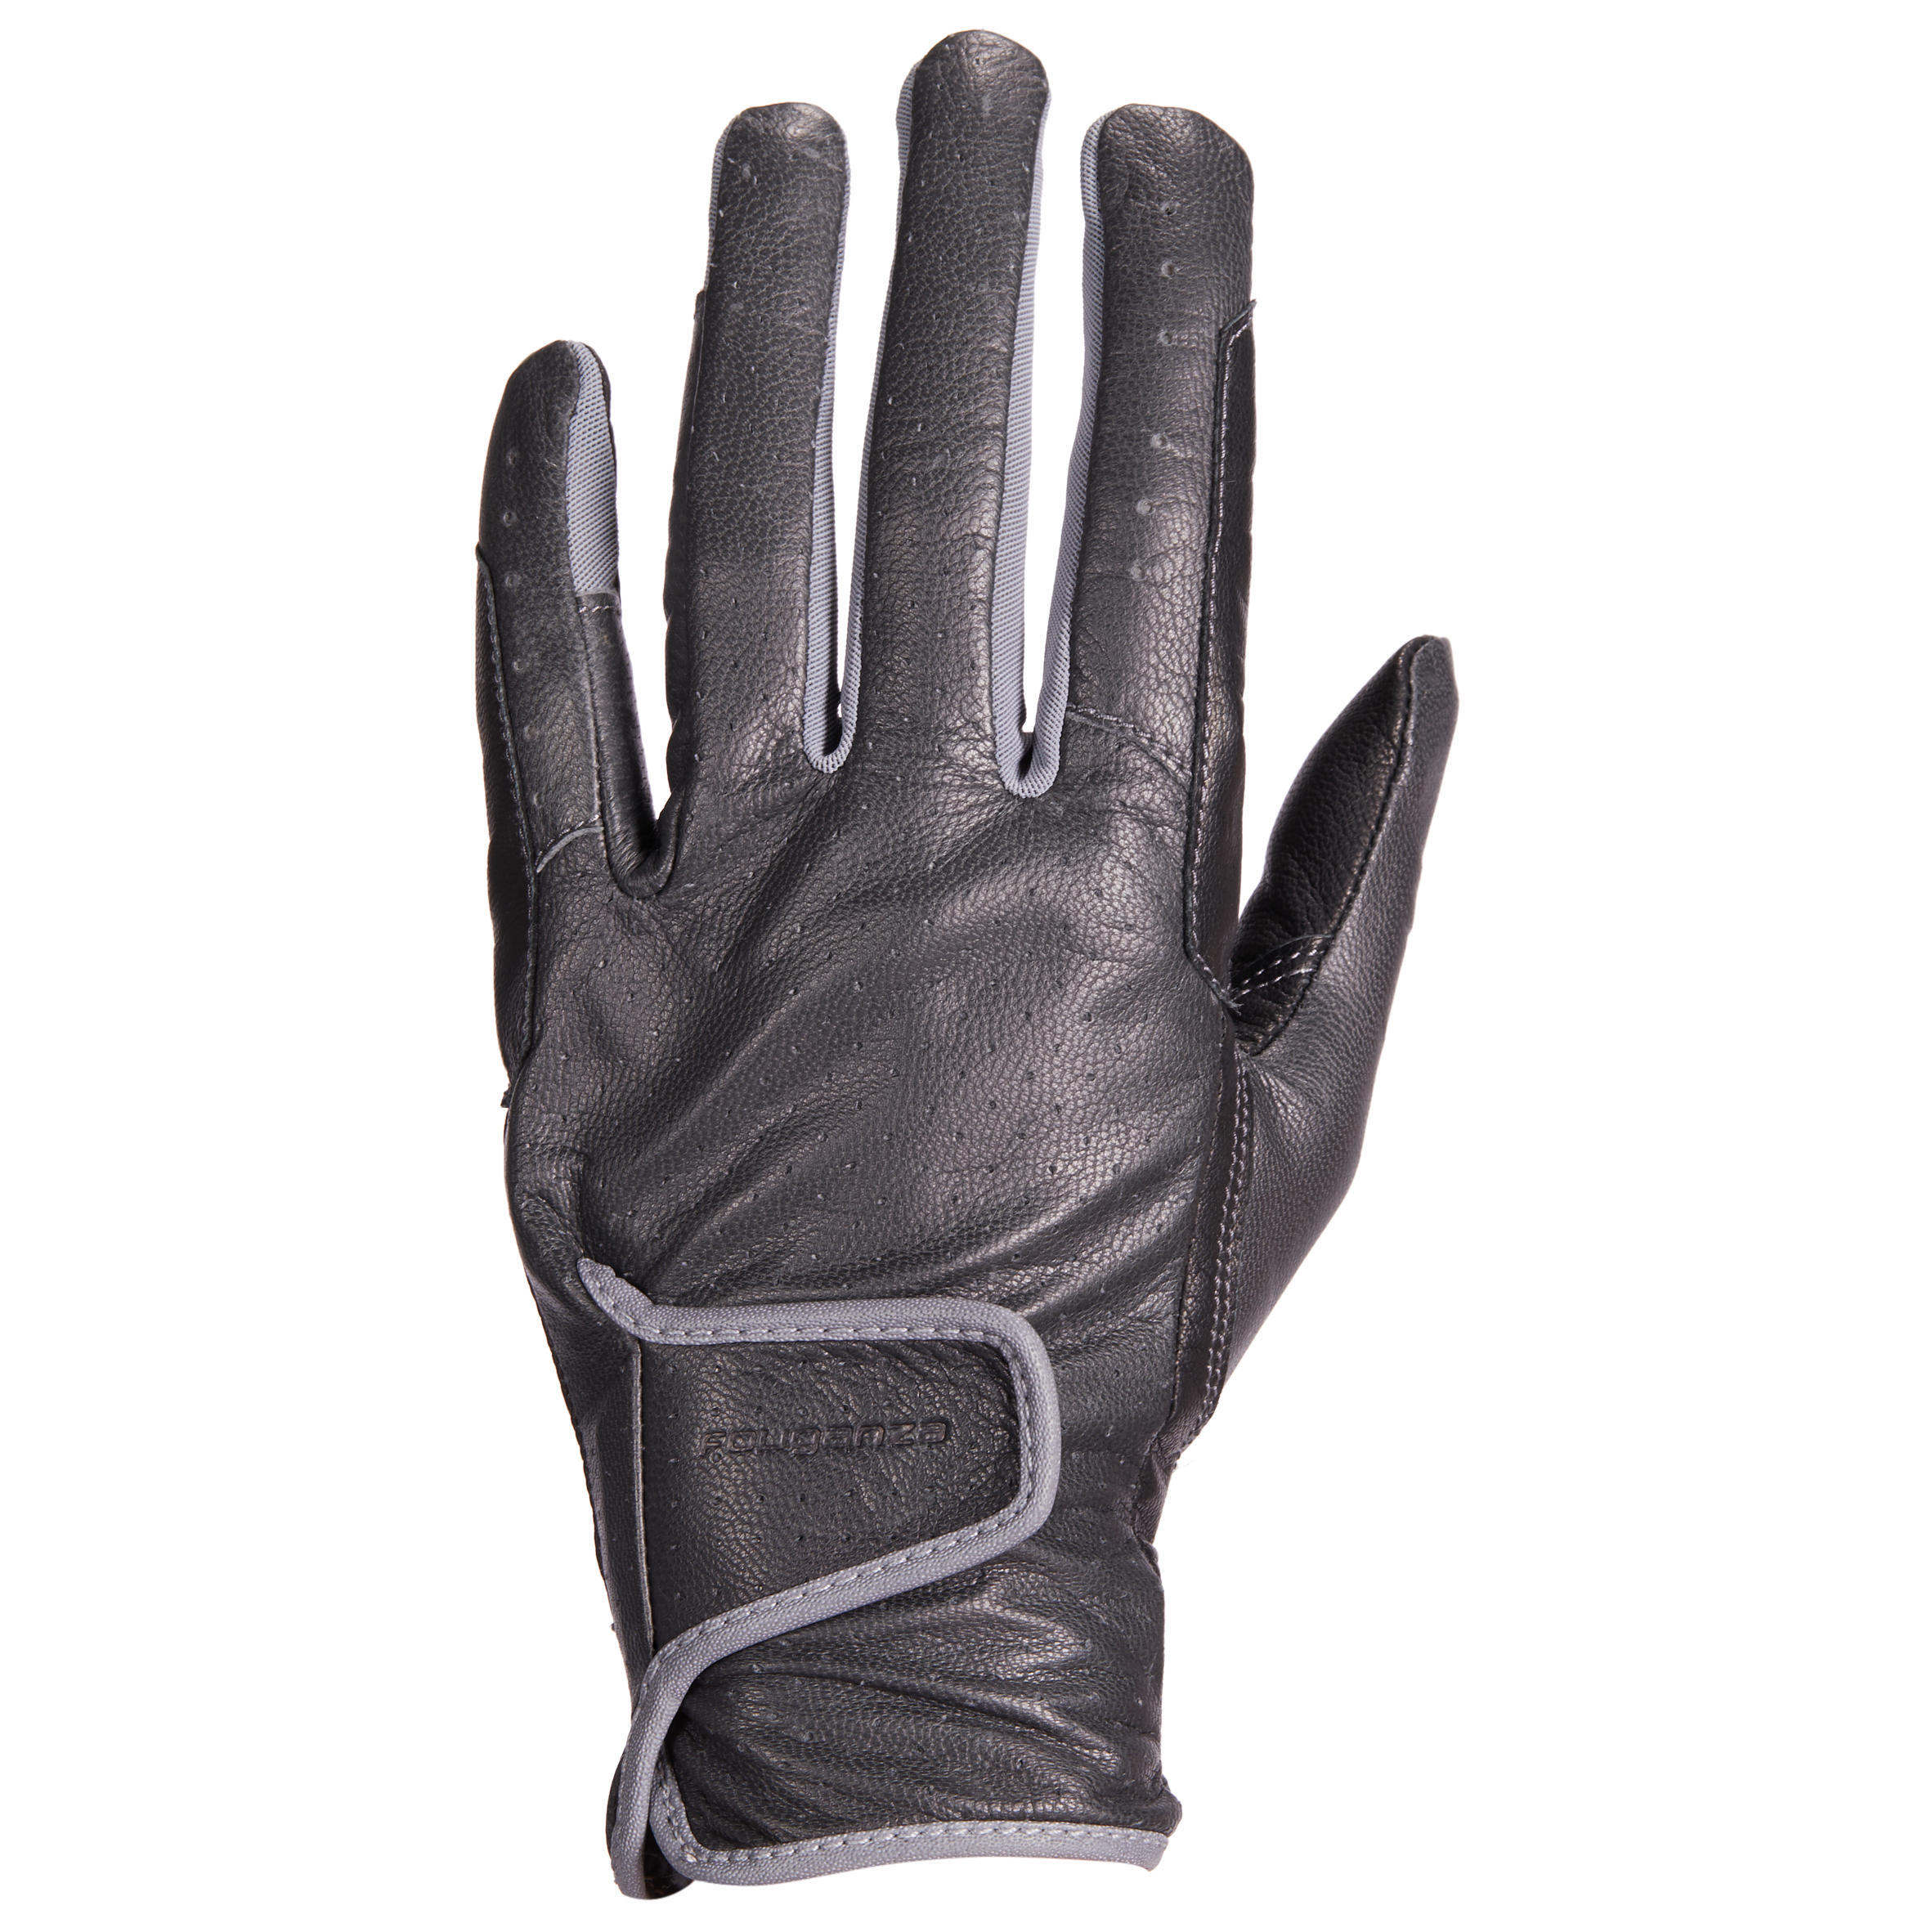 Women's Horse Riding Leather Gloves 900 - Black 1/7